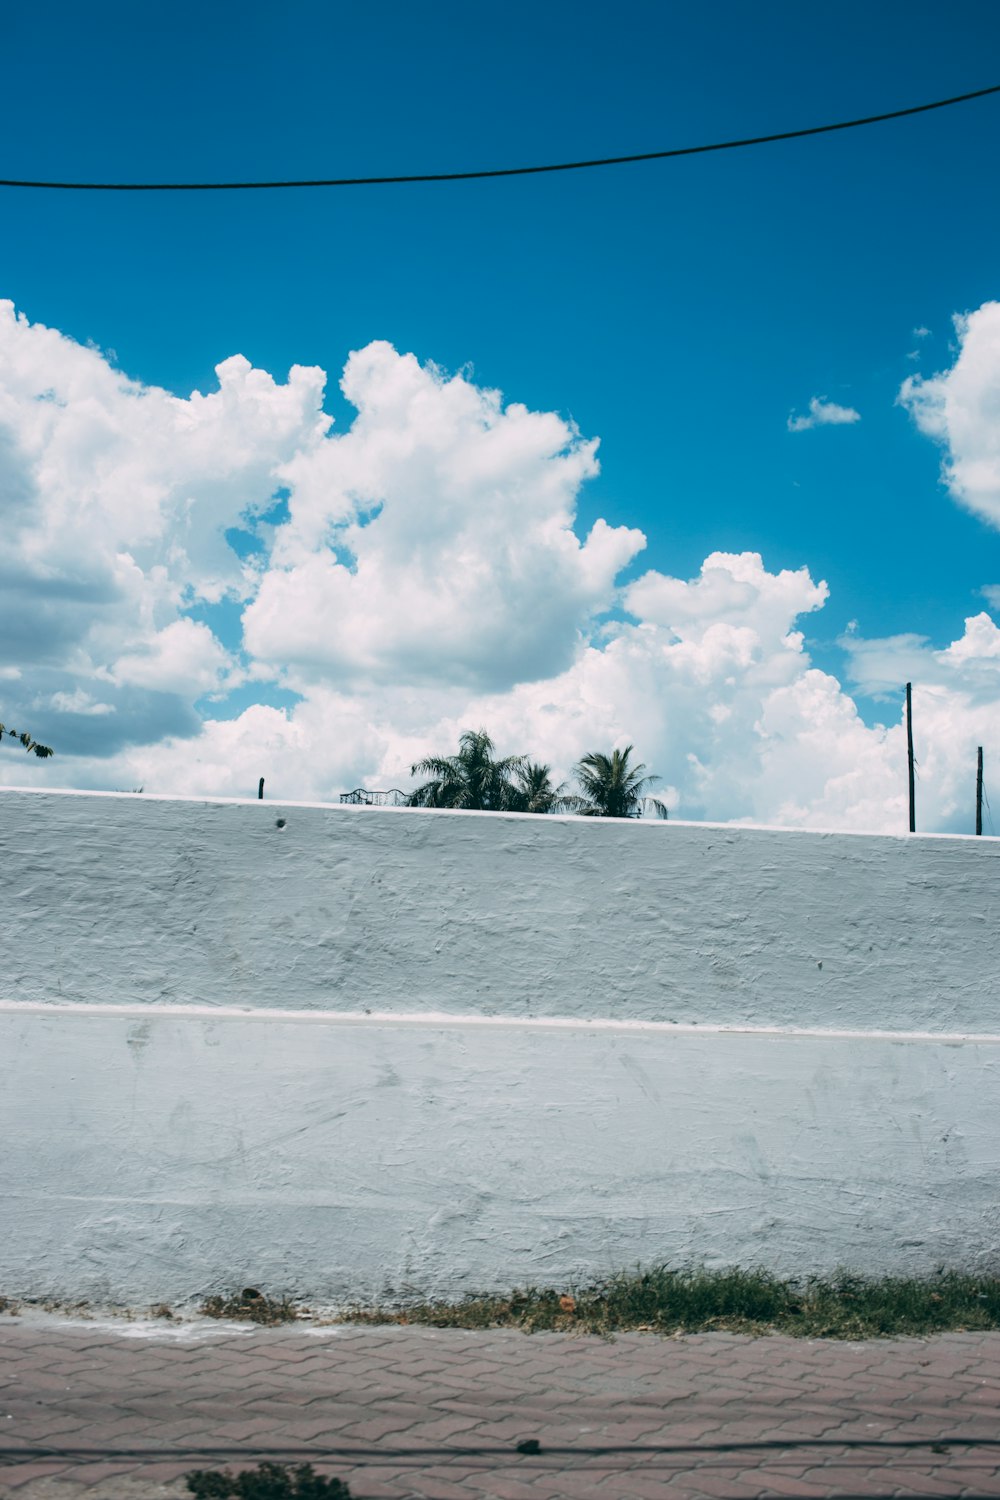 white concrete wall under white clouds and blue sky during daytime